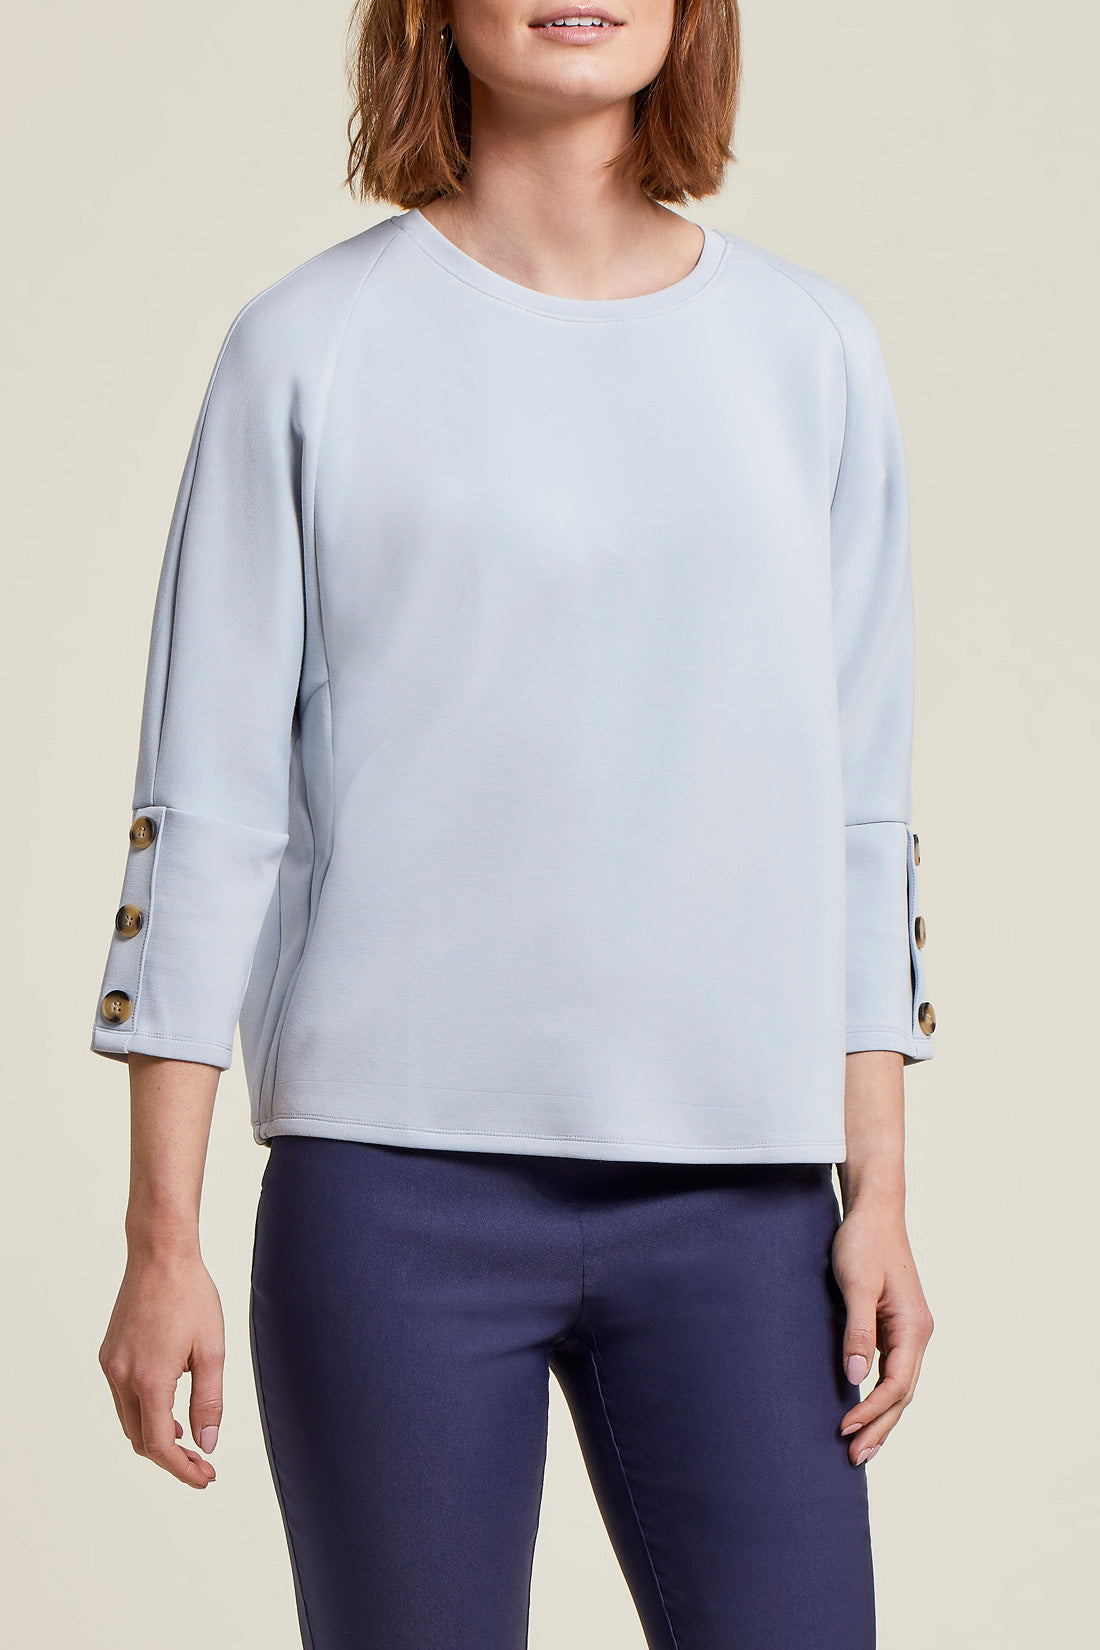 Scuba Knit Dolman Top with Button Detail by Tribal